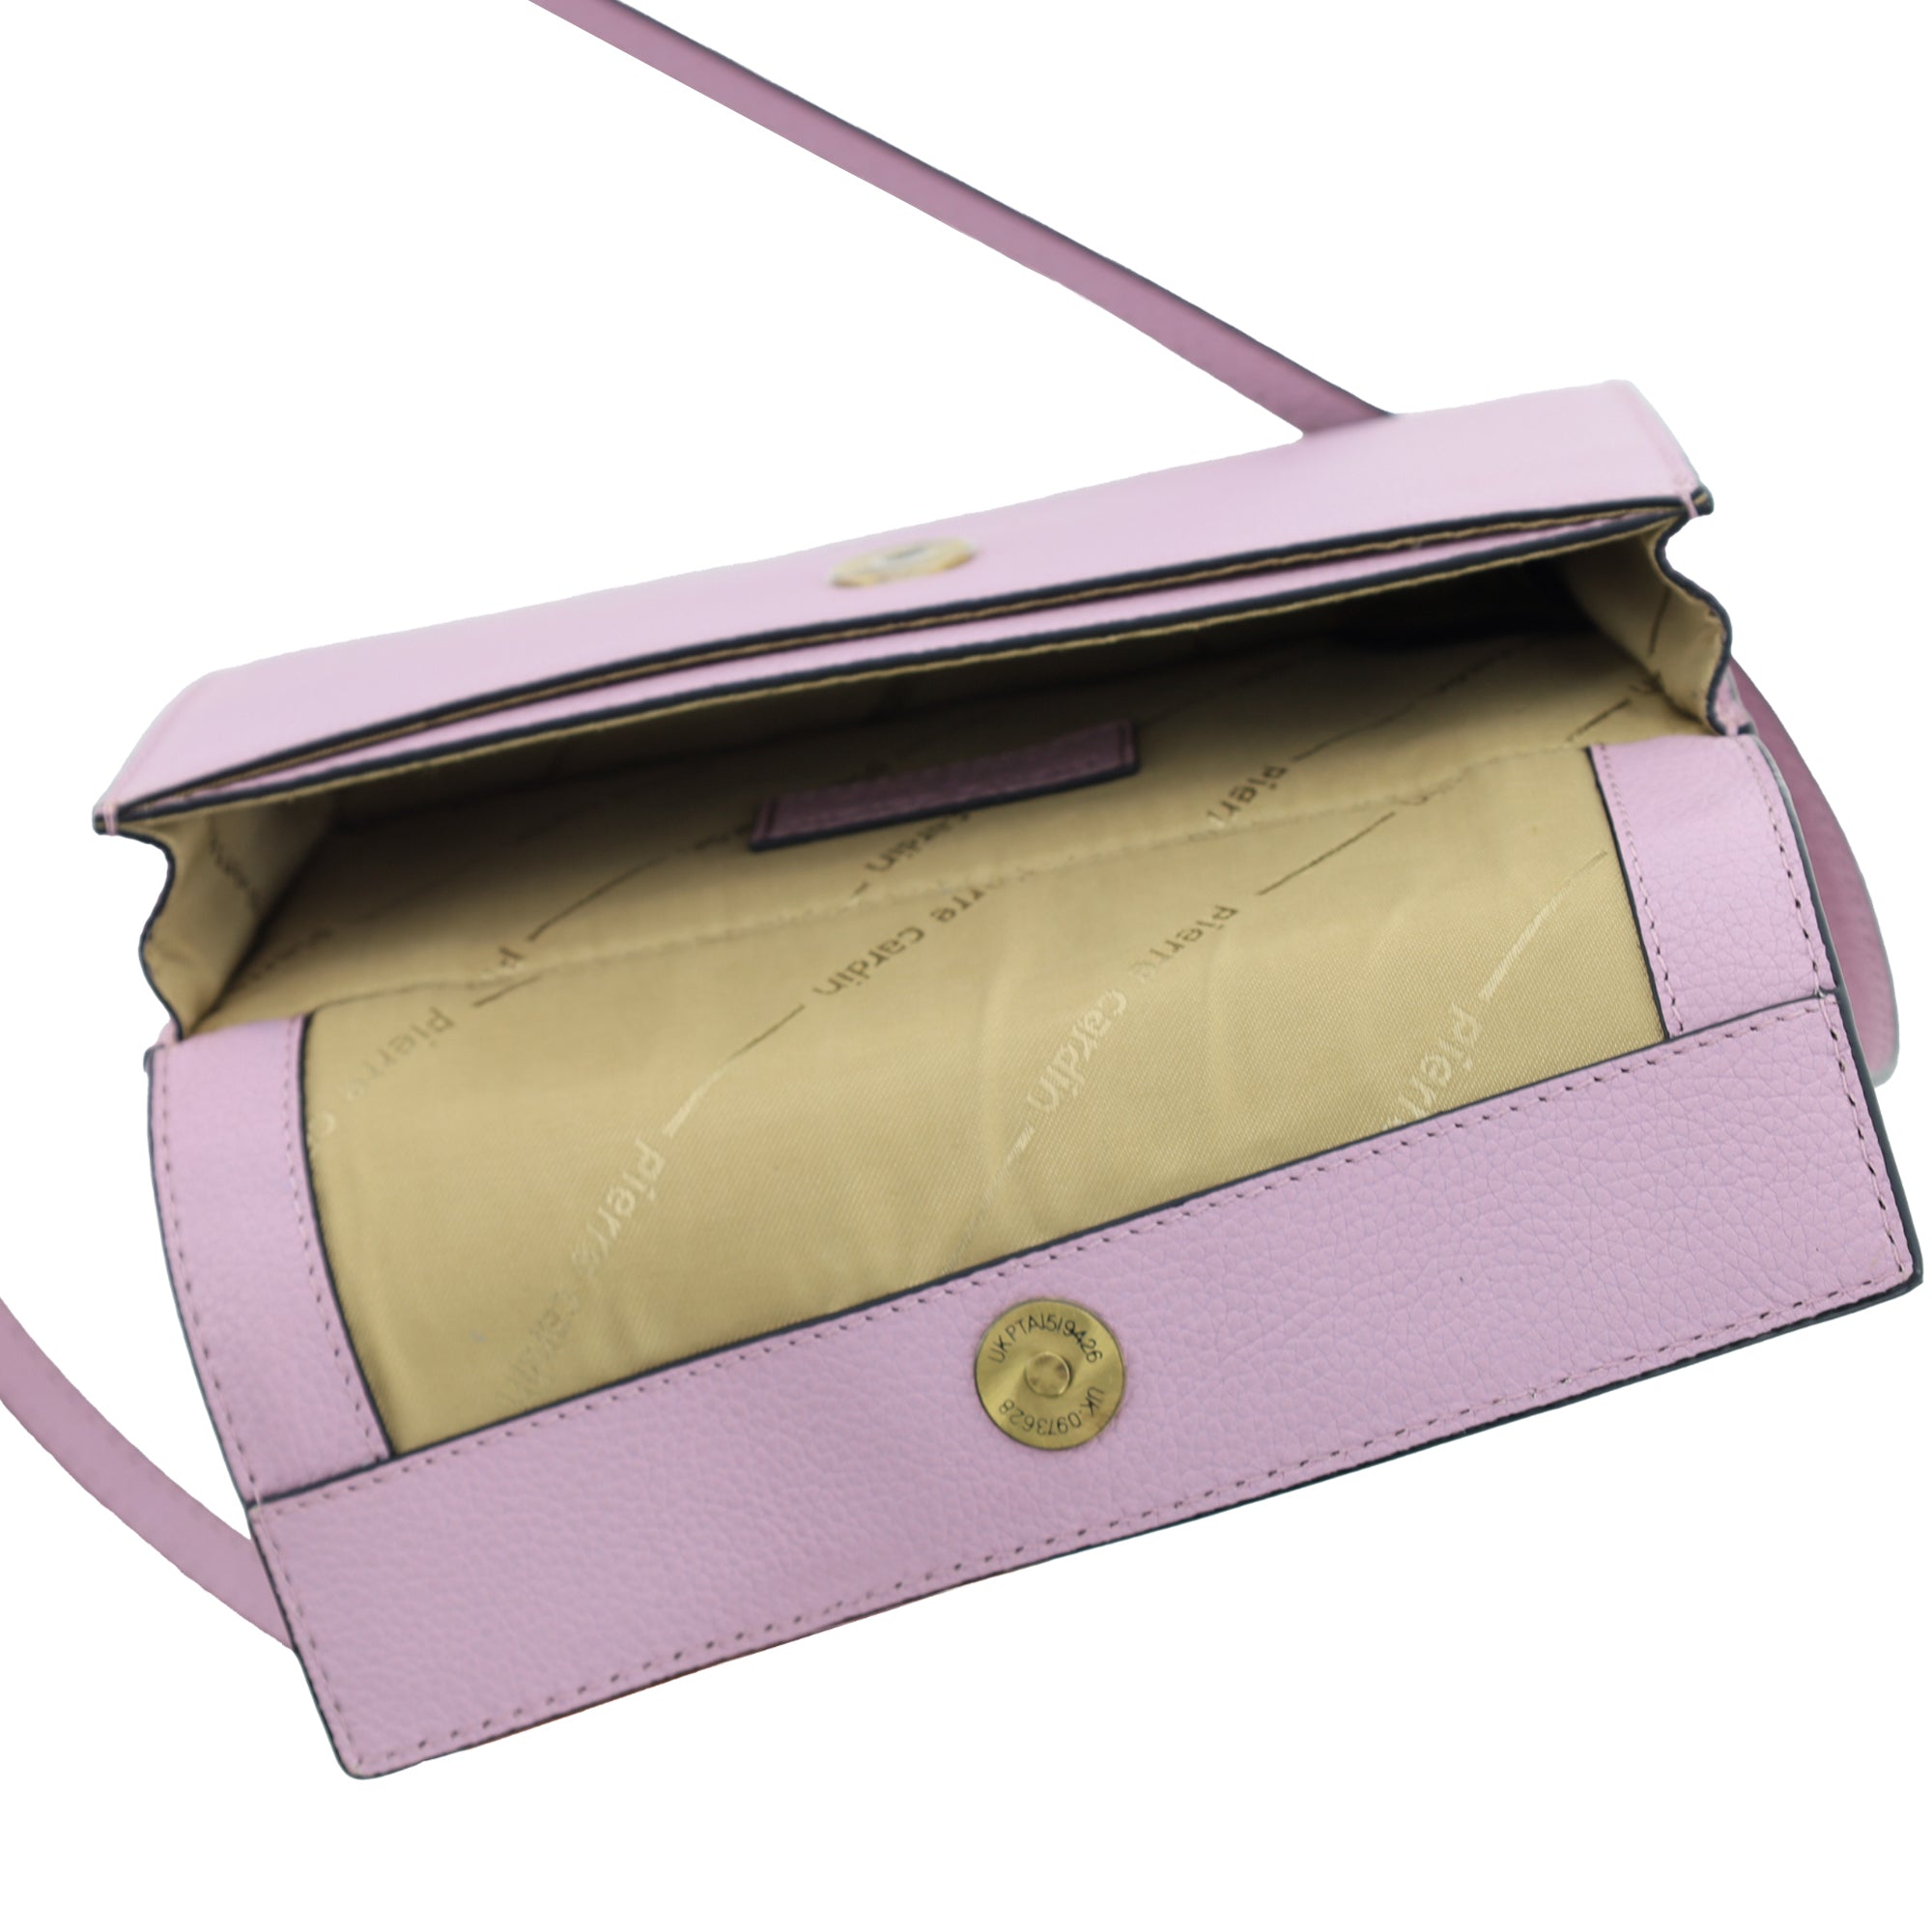 Pierre Cardin Ladies Leather Flap Over Cross-Body Bag in Pink